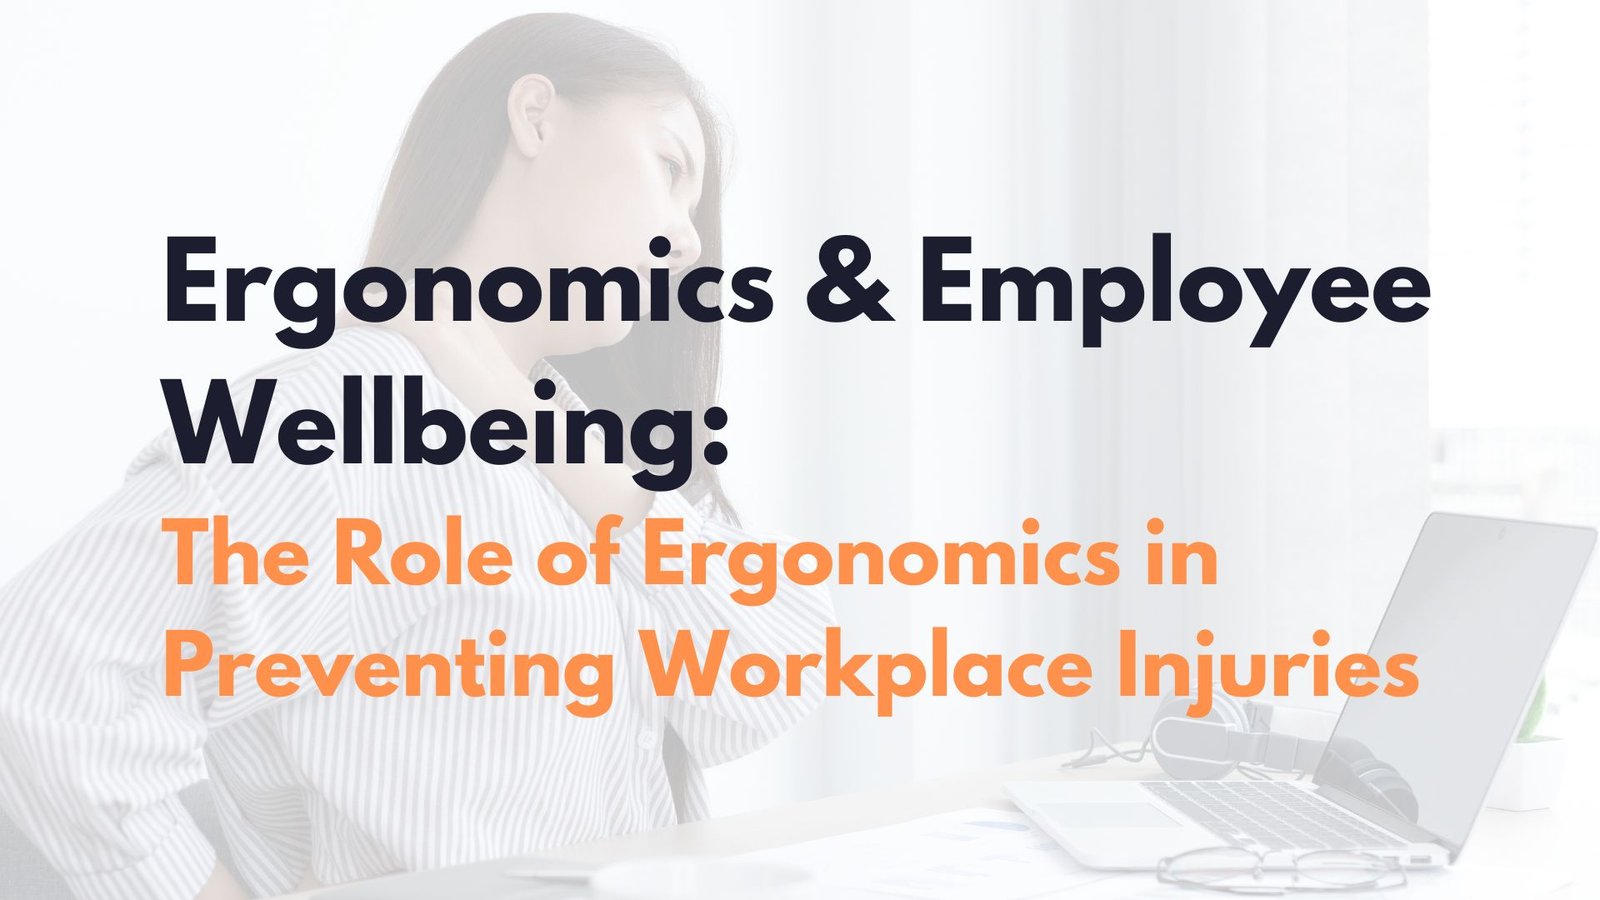 Ergonomics & Employee Wellbeing: The Role of Ergonomics in Preventing Workplace Injuries